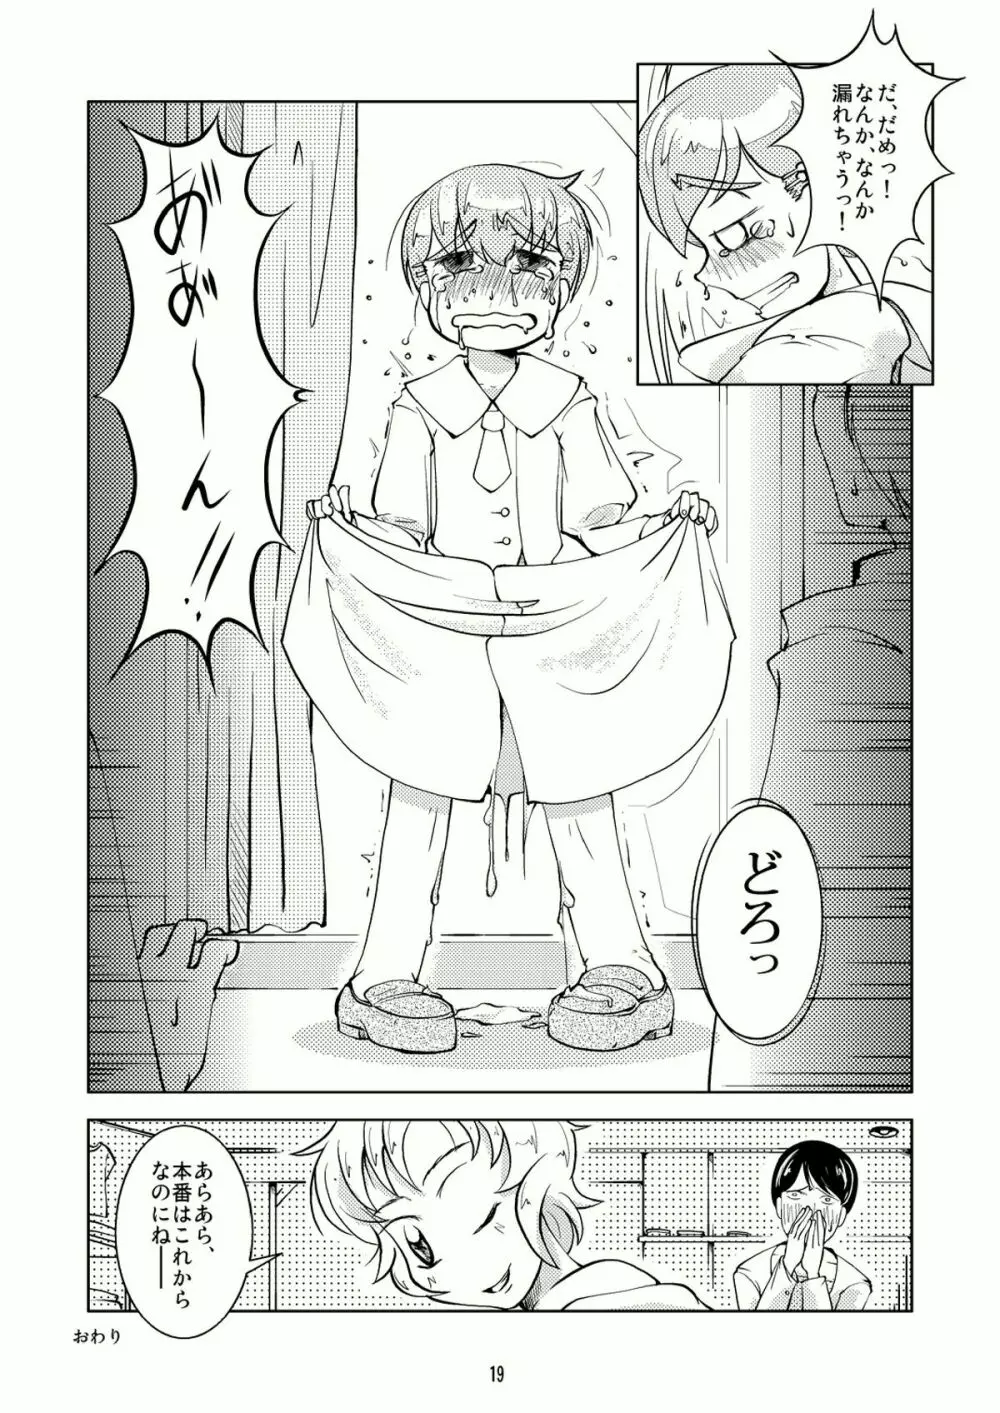 Crossdressing Boys Assemblage - page18